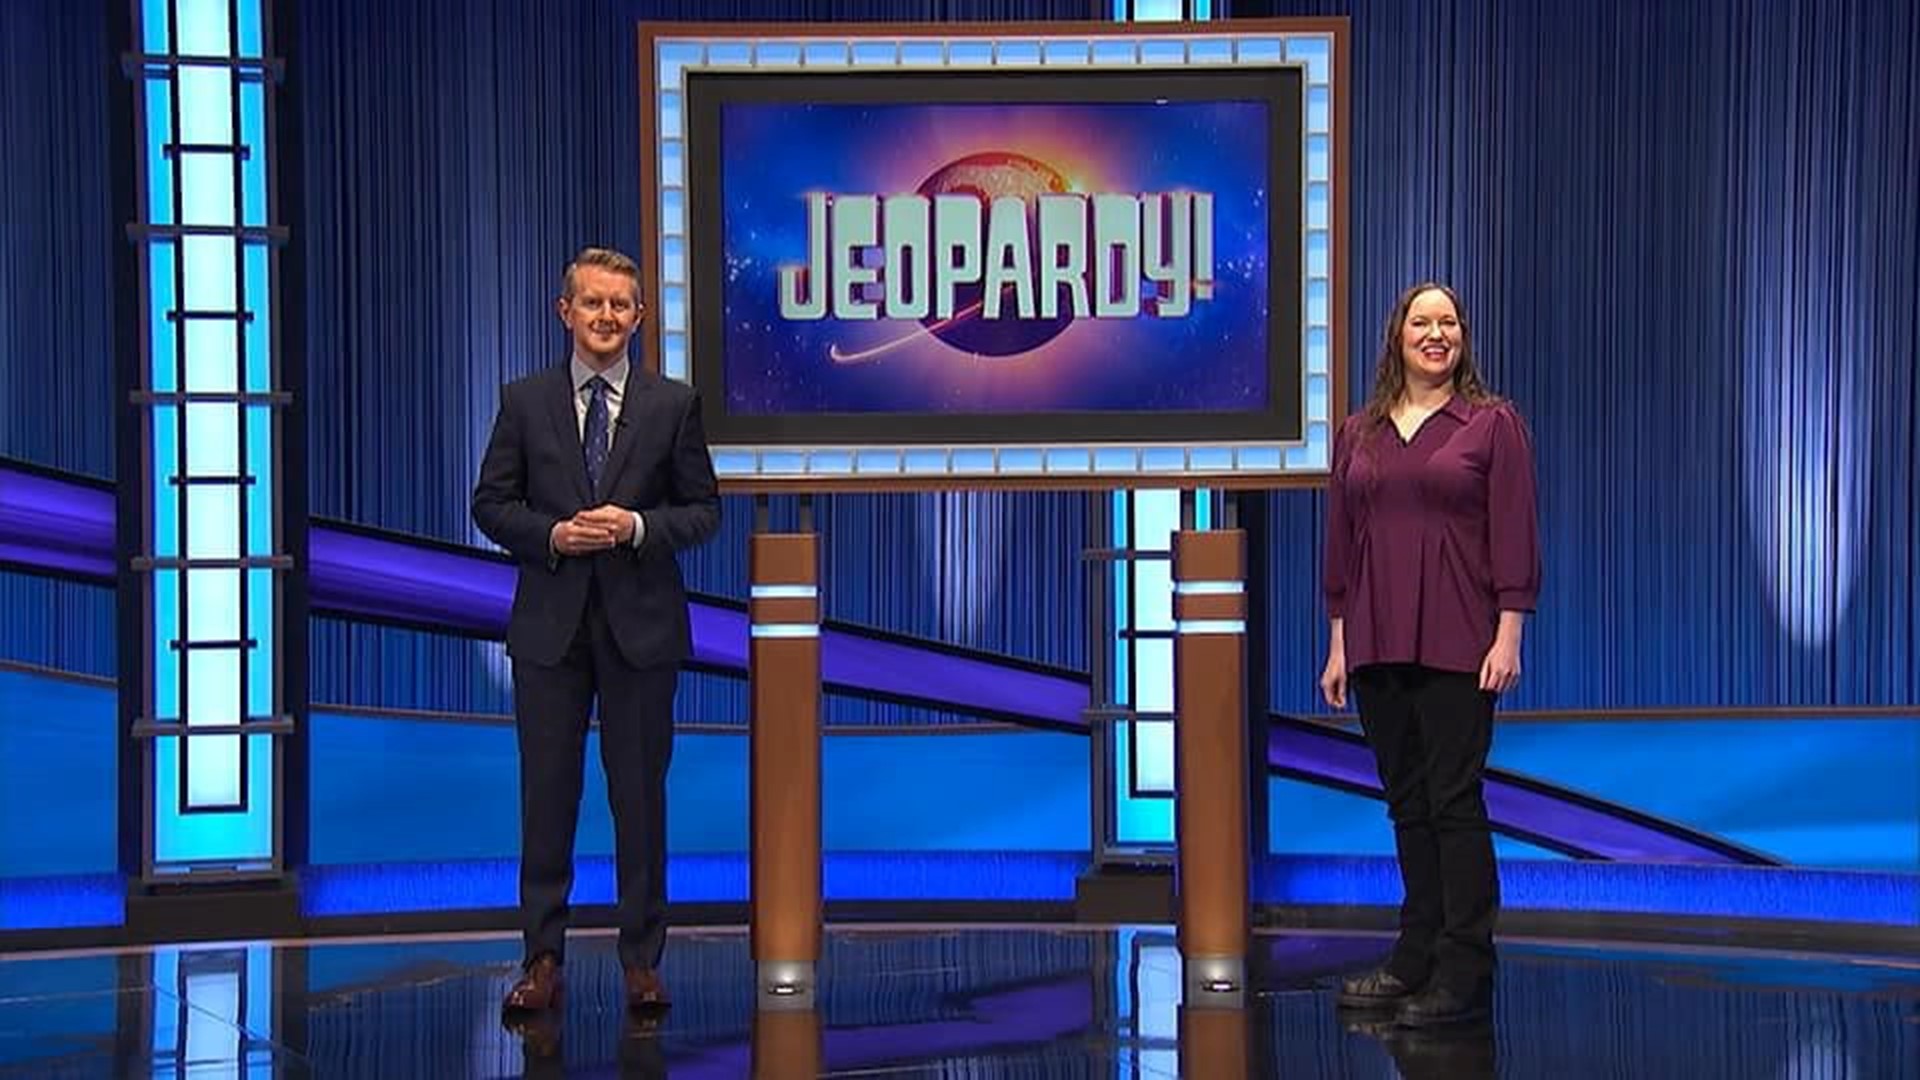 Melissa Woodall will appear and compete on the quiz show Jeopardy! Friday, Sept. 16 at 4:30 p.m.